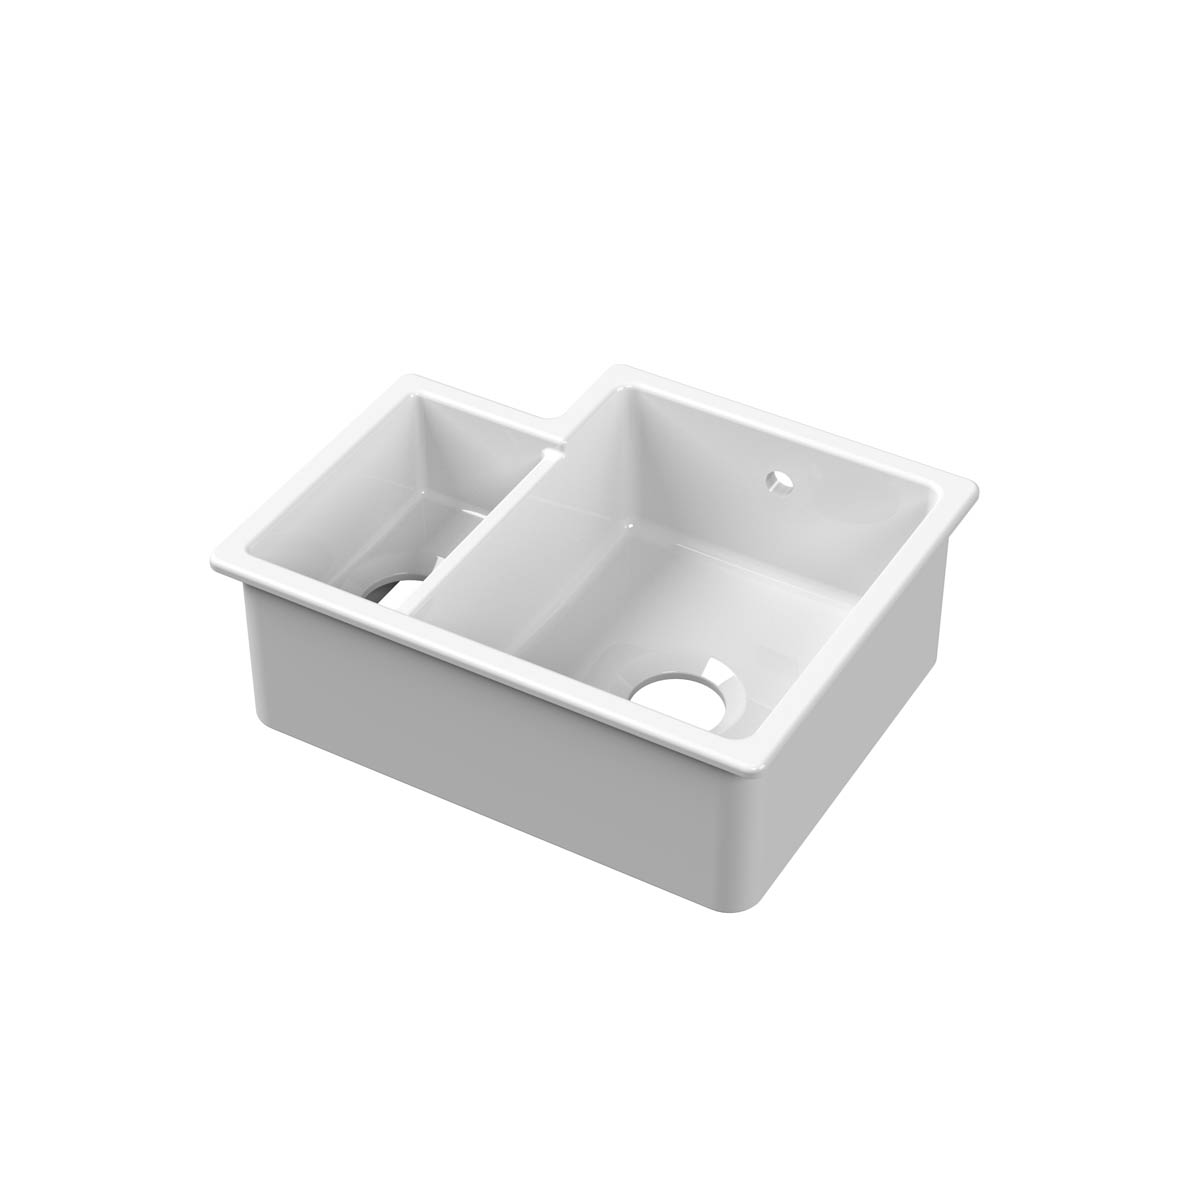 Nuie 549x441x195mm Inset or Undermount Right Hand 1.5 Bowl Sink with 90mm Central Waste & Overflow - White (20326)